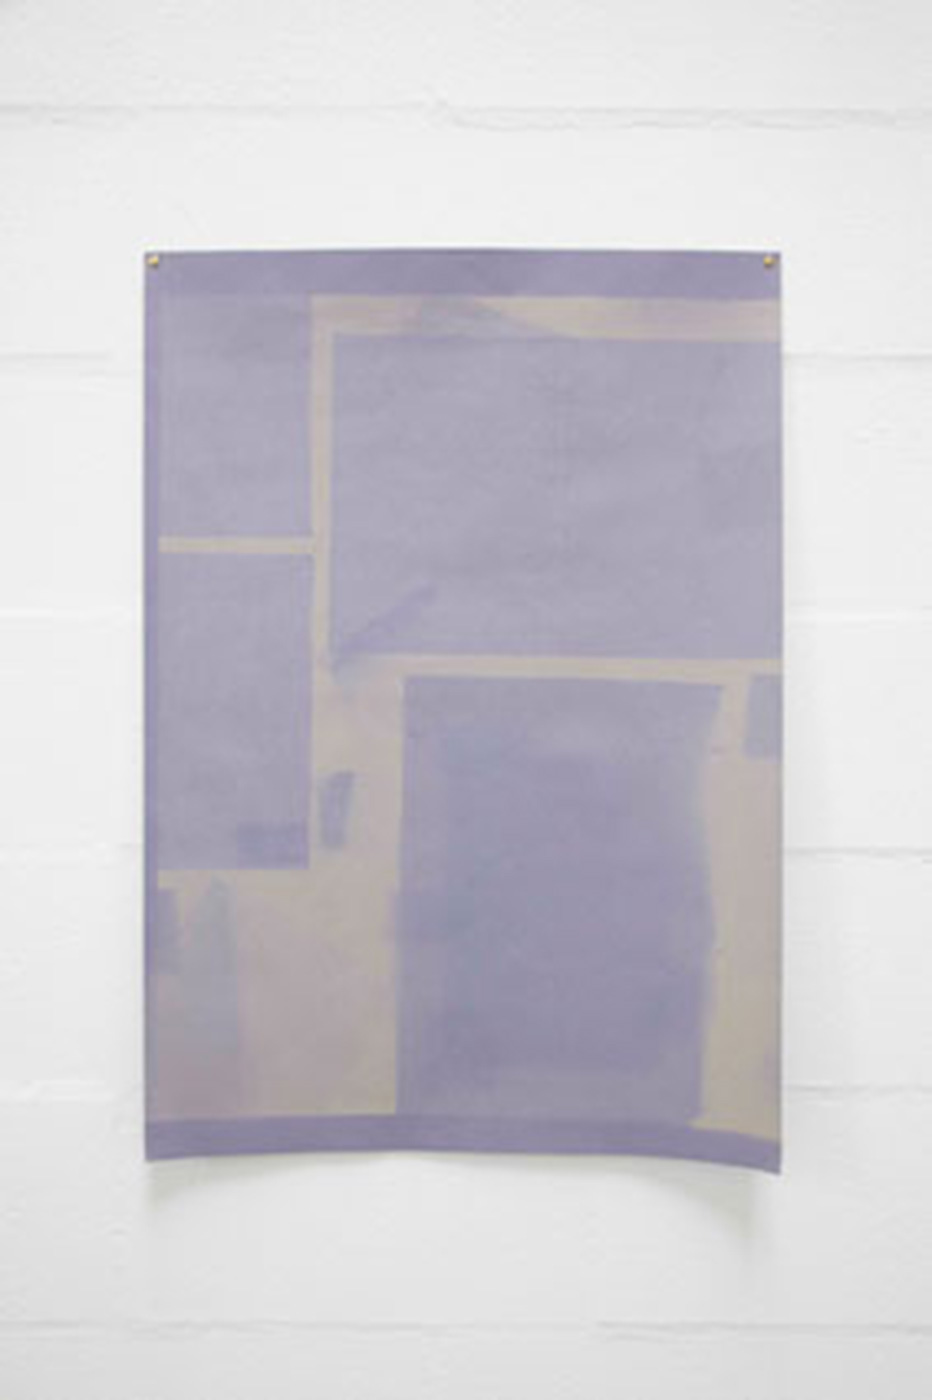 Faded Paper 41s, 2011